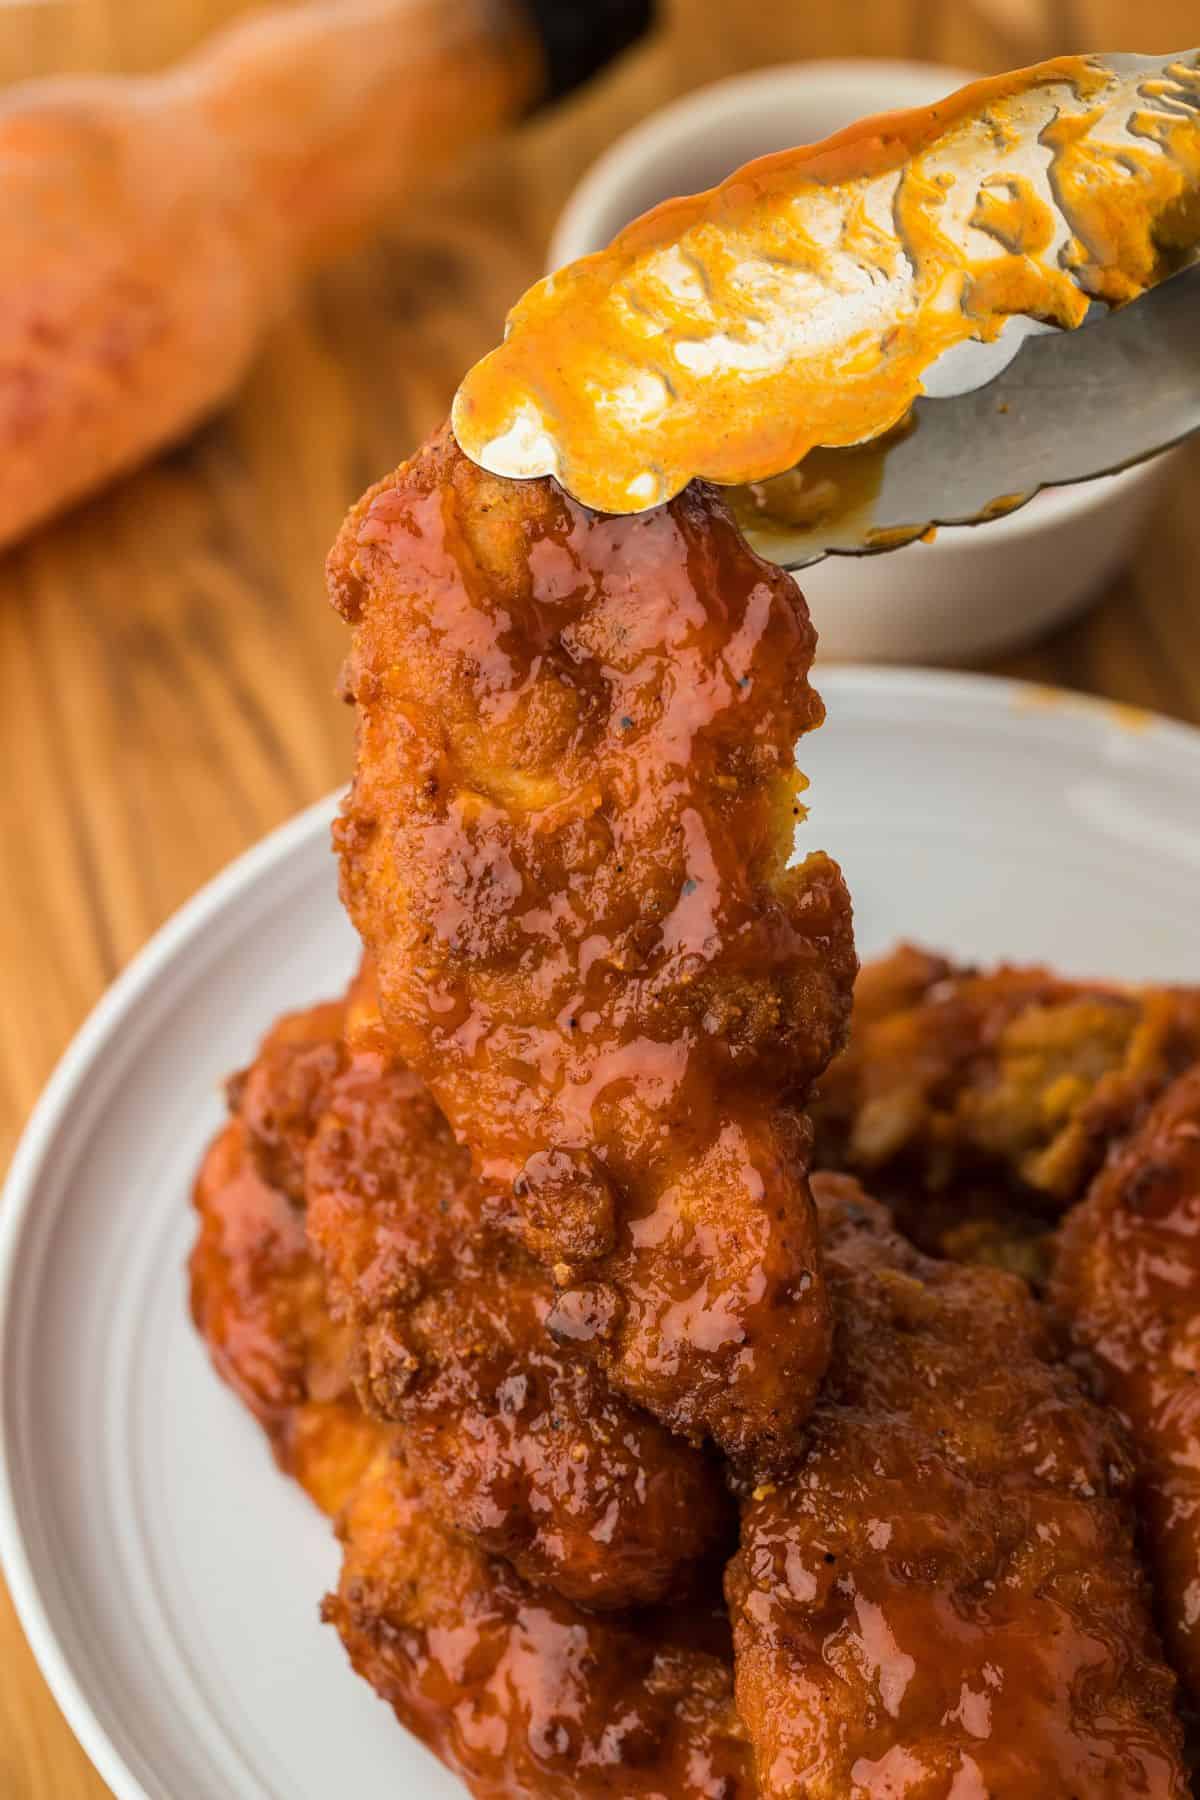 Tongs holding a hot honey chicken tender over a plate stacked with more glazed tenders, all on a wooden table